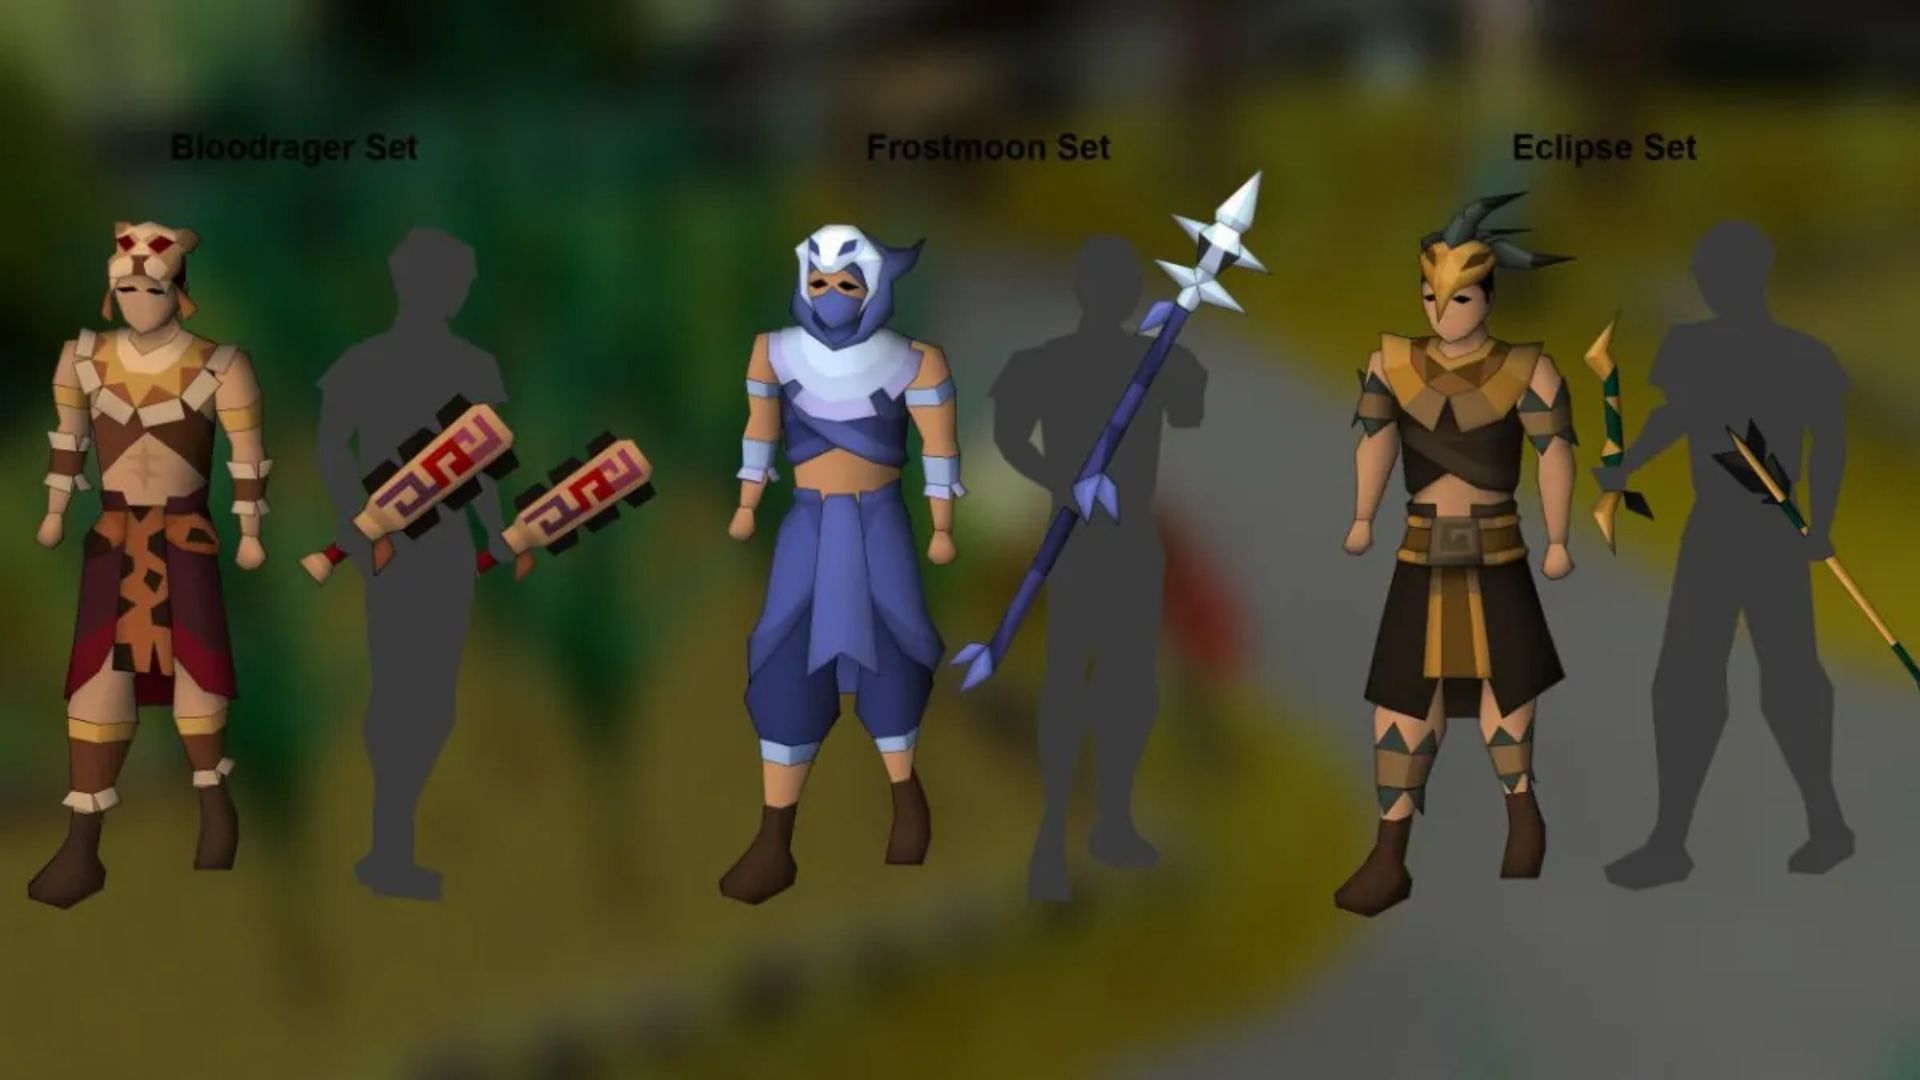 Perilous Moons is a dungeon in Varlamore (Image via Jagex)